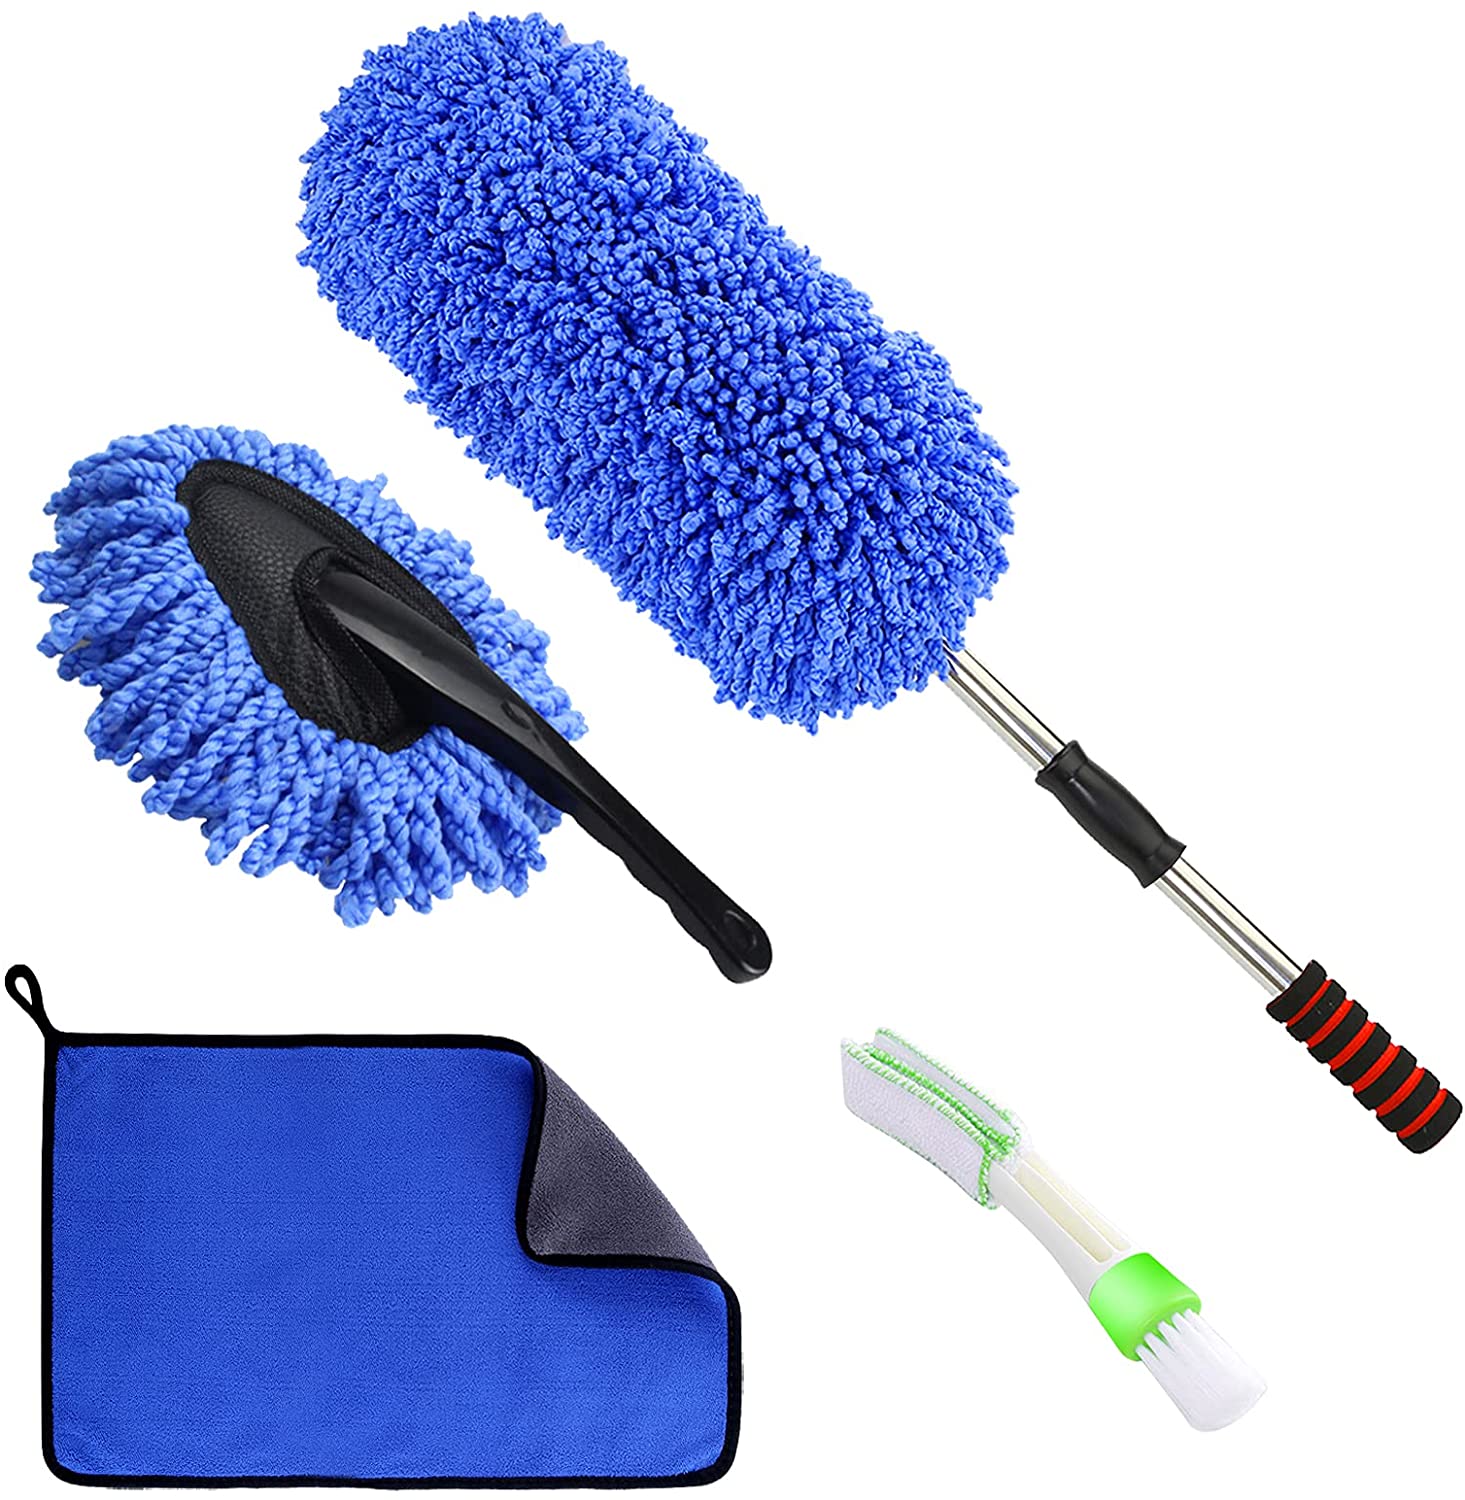  Jaronx 4PCS Car Duster Brushes Set, Scratch Free Car Dusters  with Extendable Handle Dirt Cleaning Brush, Auto Duster Brush, Detailing  Brush, Microfiber Towel Car Duster Interior Exterior Dusting Tools :  Automotive